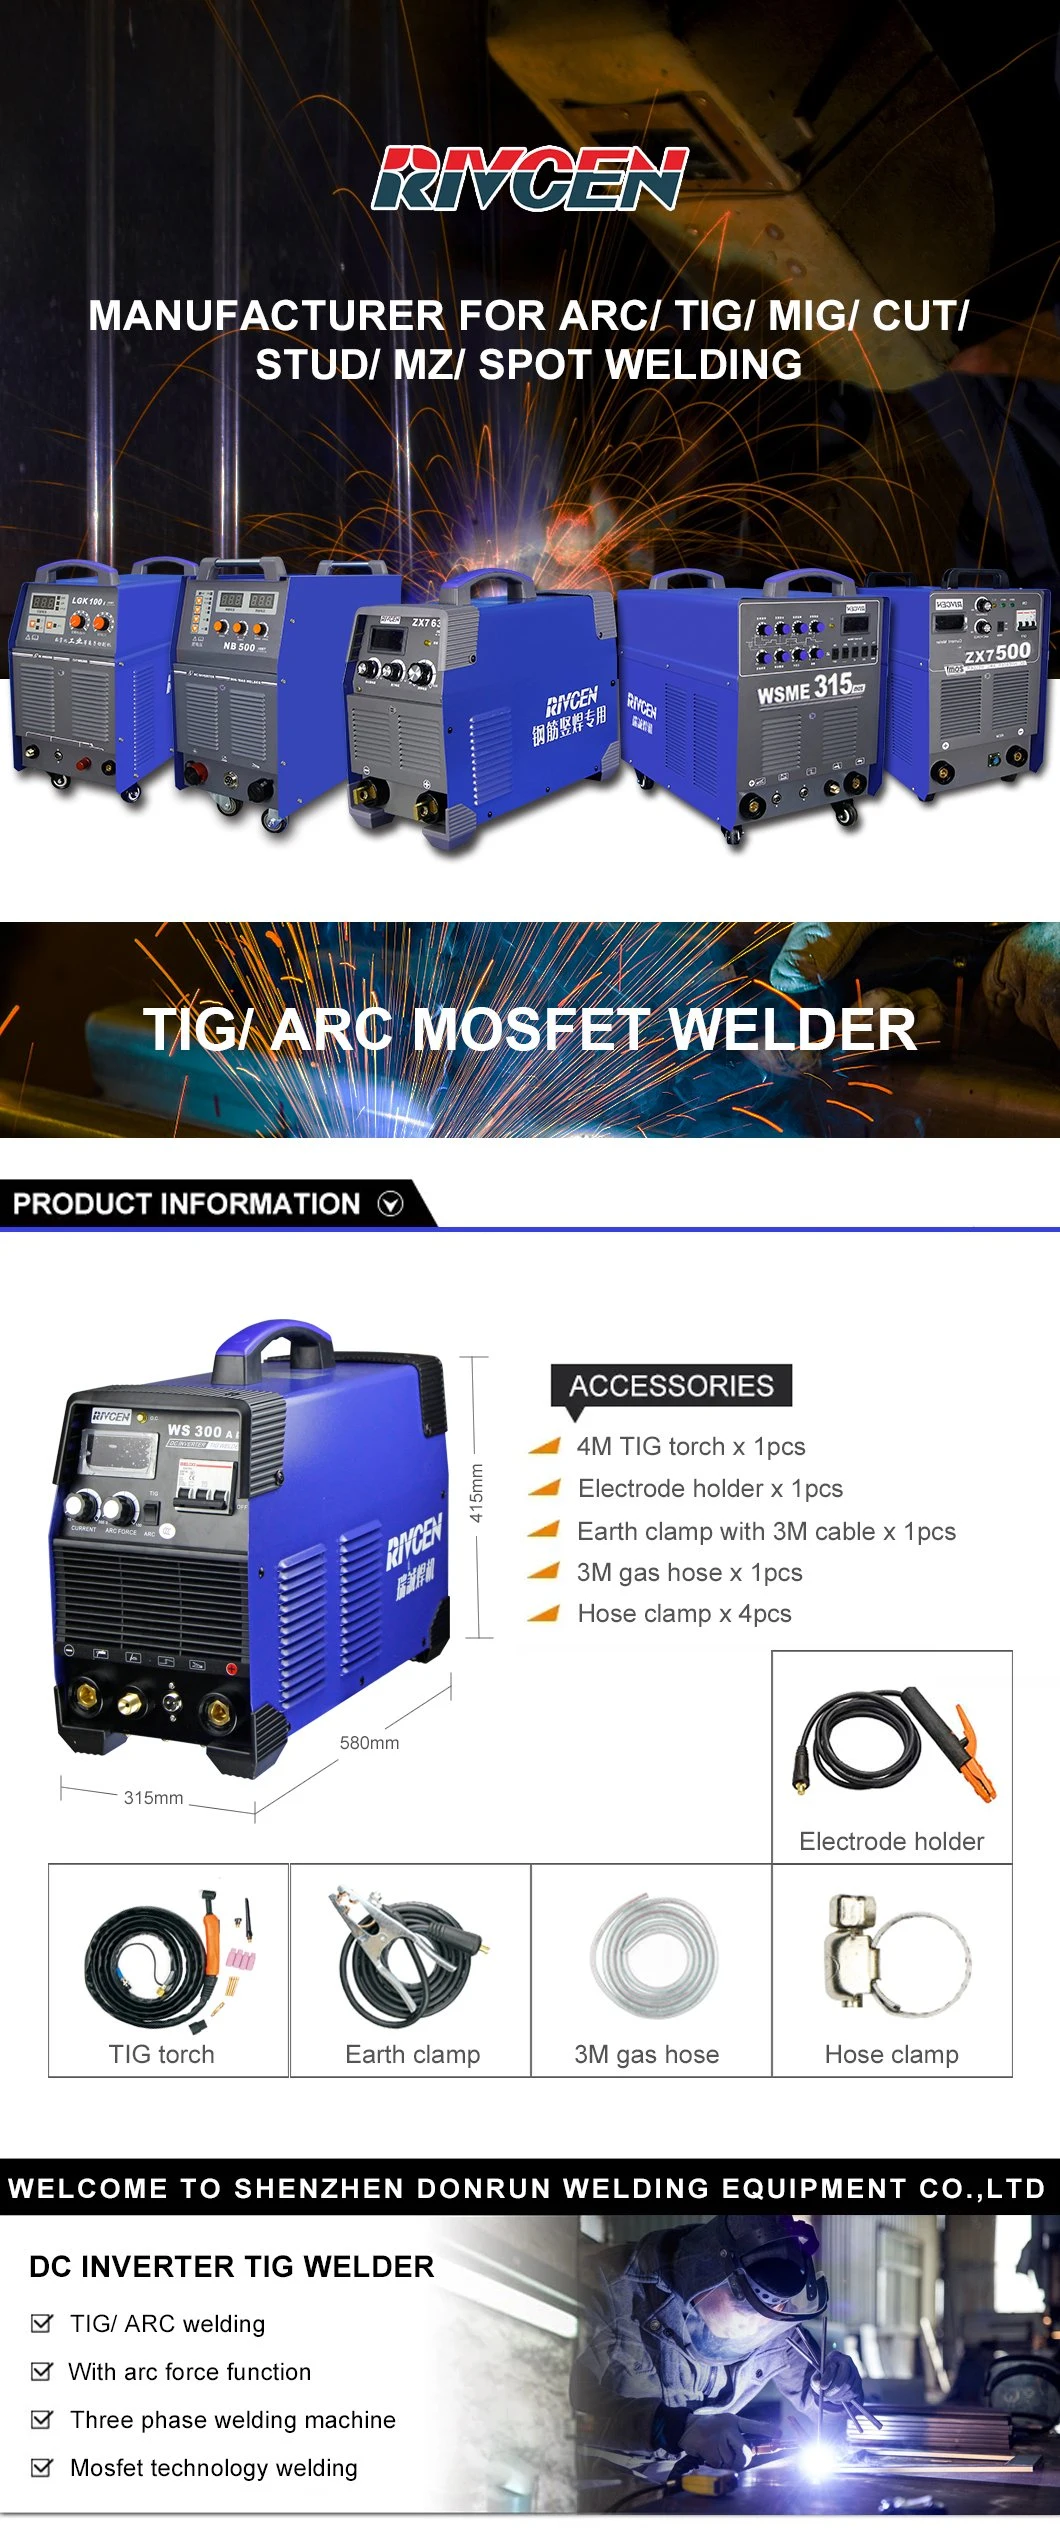 Arc/ TIG Mosfet Technology DC Inverter Welding Machine with Arc Force Function